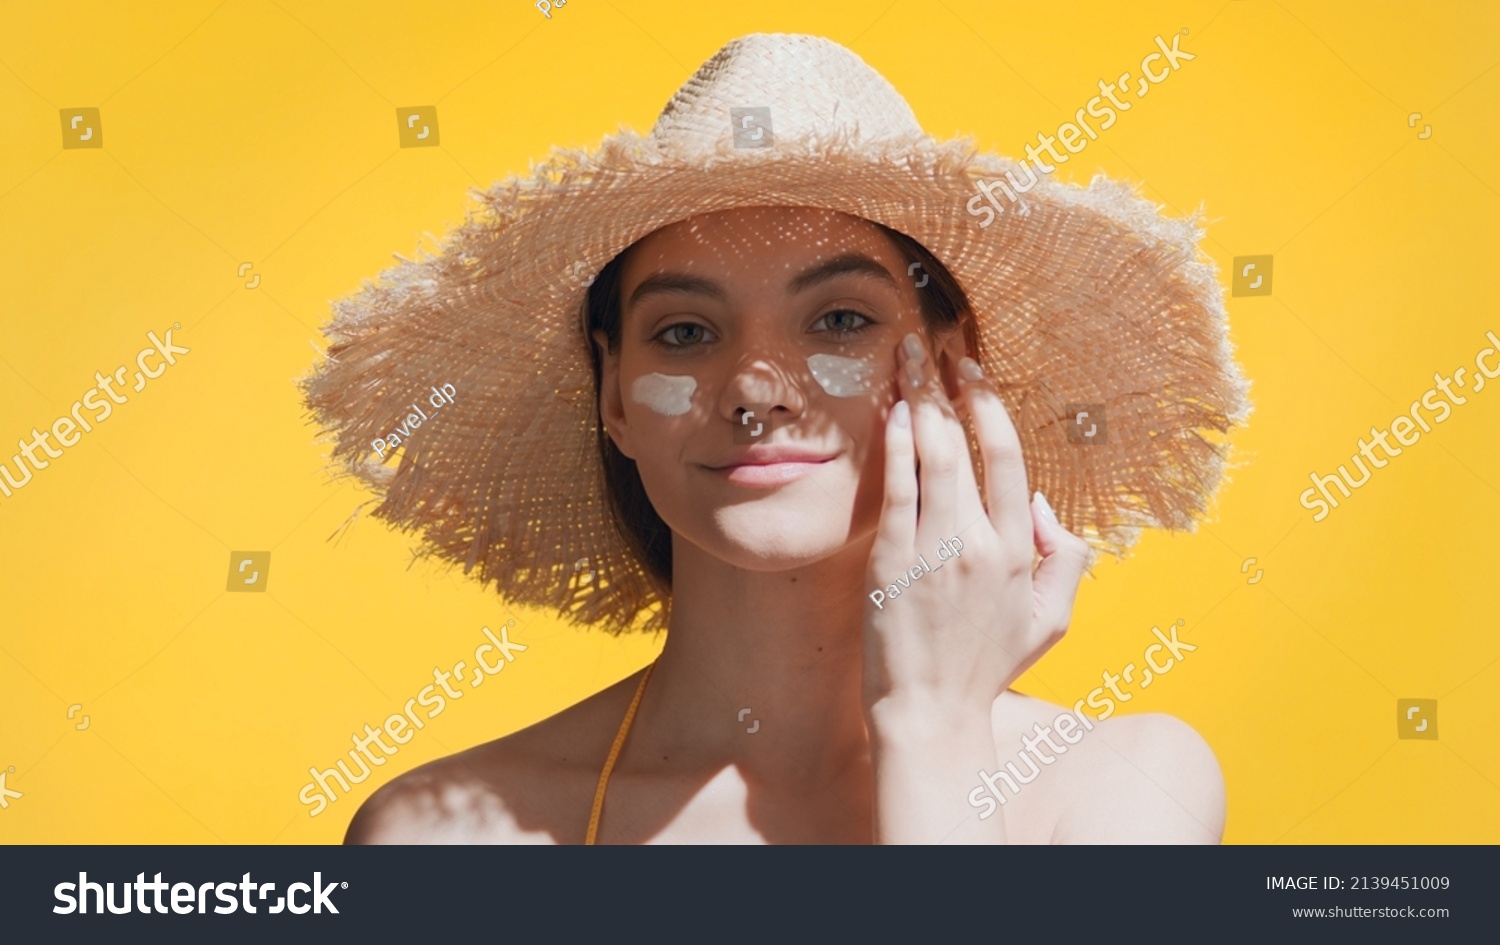 Young good-looking brunette Caucasian woman in a straw hat puts spf cream on her cheeks, enjoys the sun and smiles for the camera against yellow background | Spf cream concept #2139451009